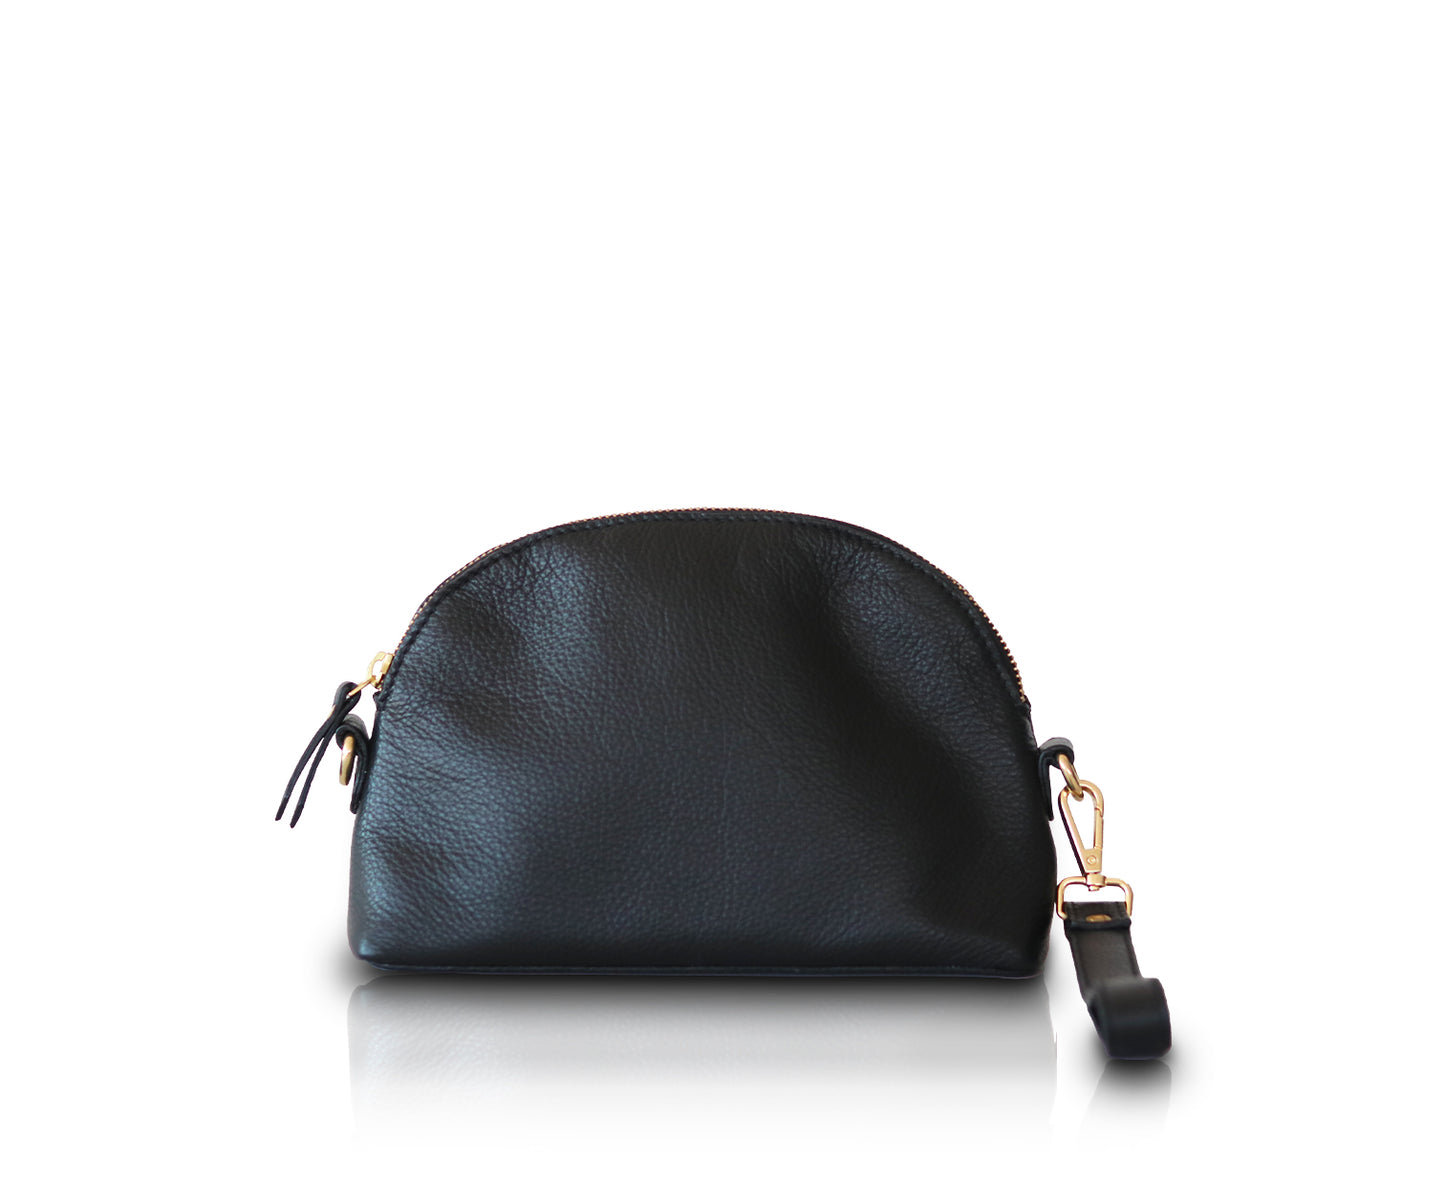 Load image into Gallery viewer, Leather Eclipse Crossbody Bags - Camel
